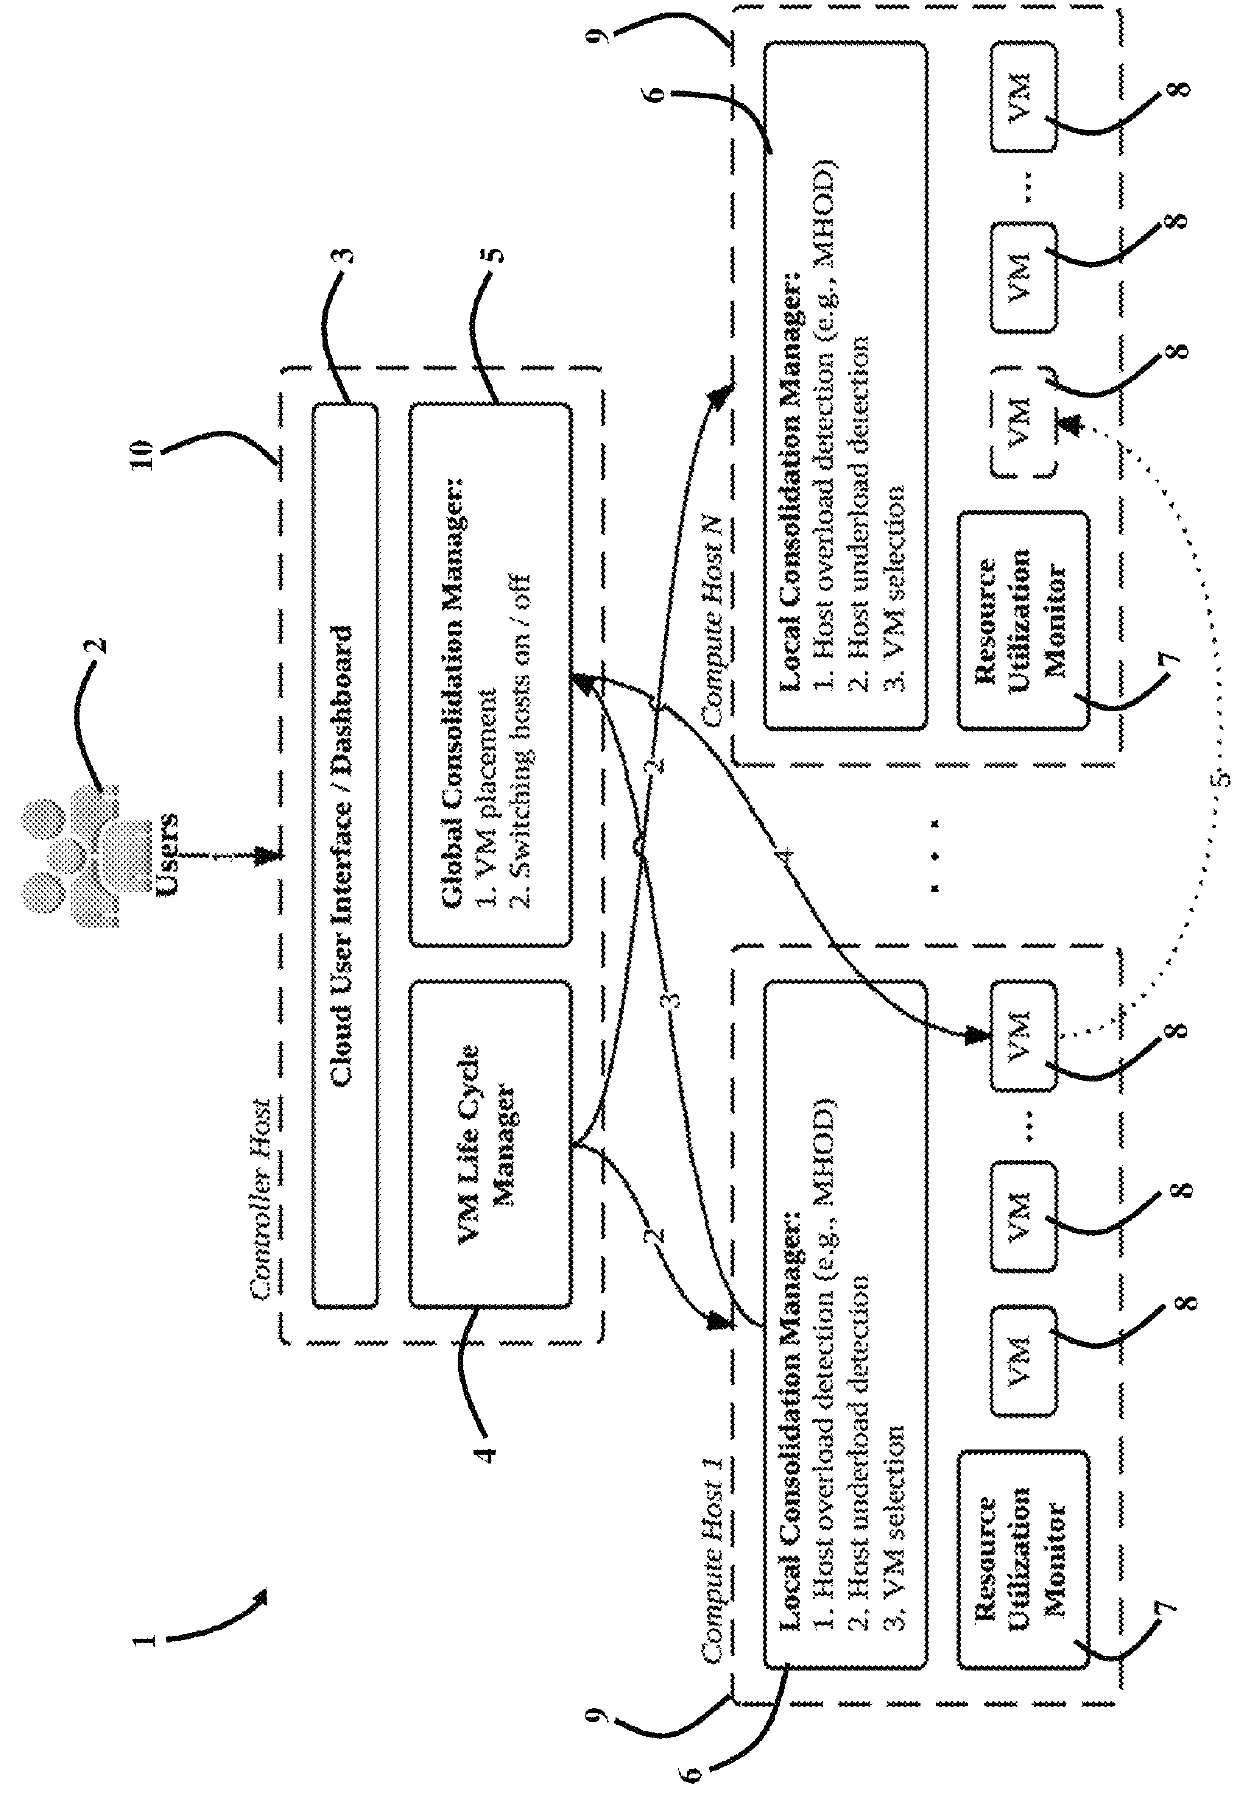 System, method and computer program product for energy-efficient and service level agreement (SLA)-based management of data centers for cloud computing